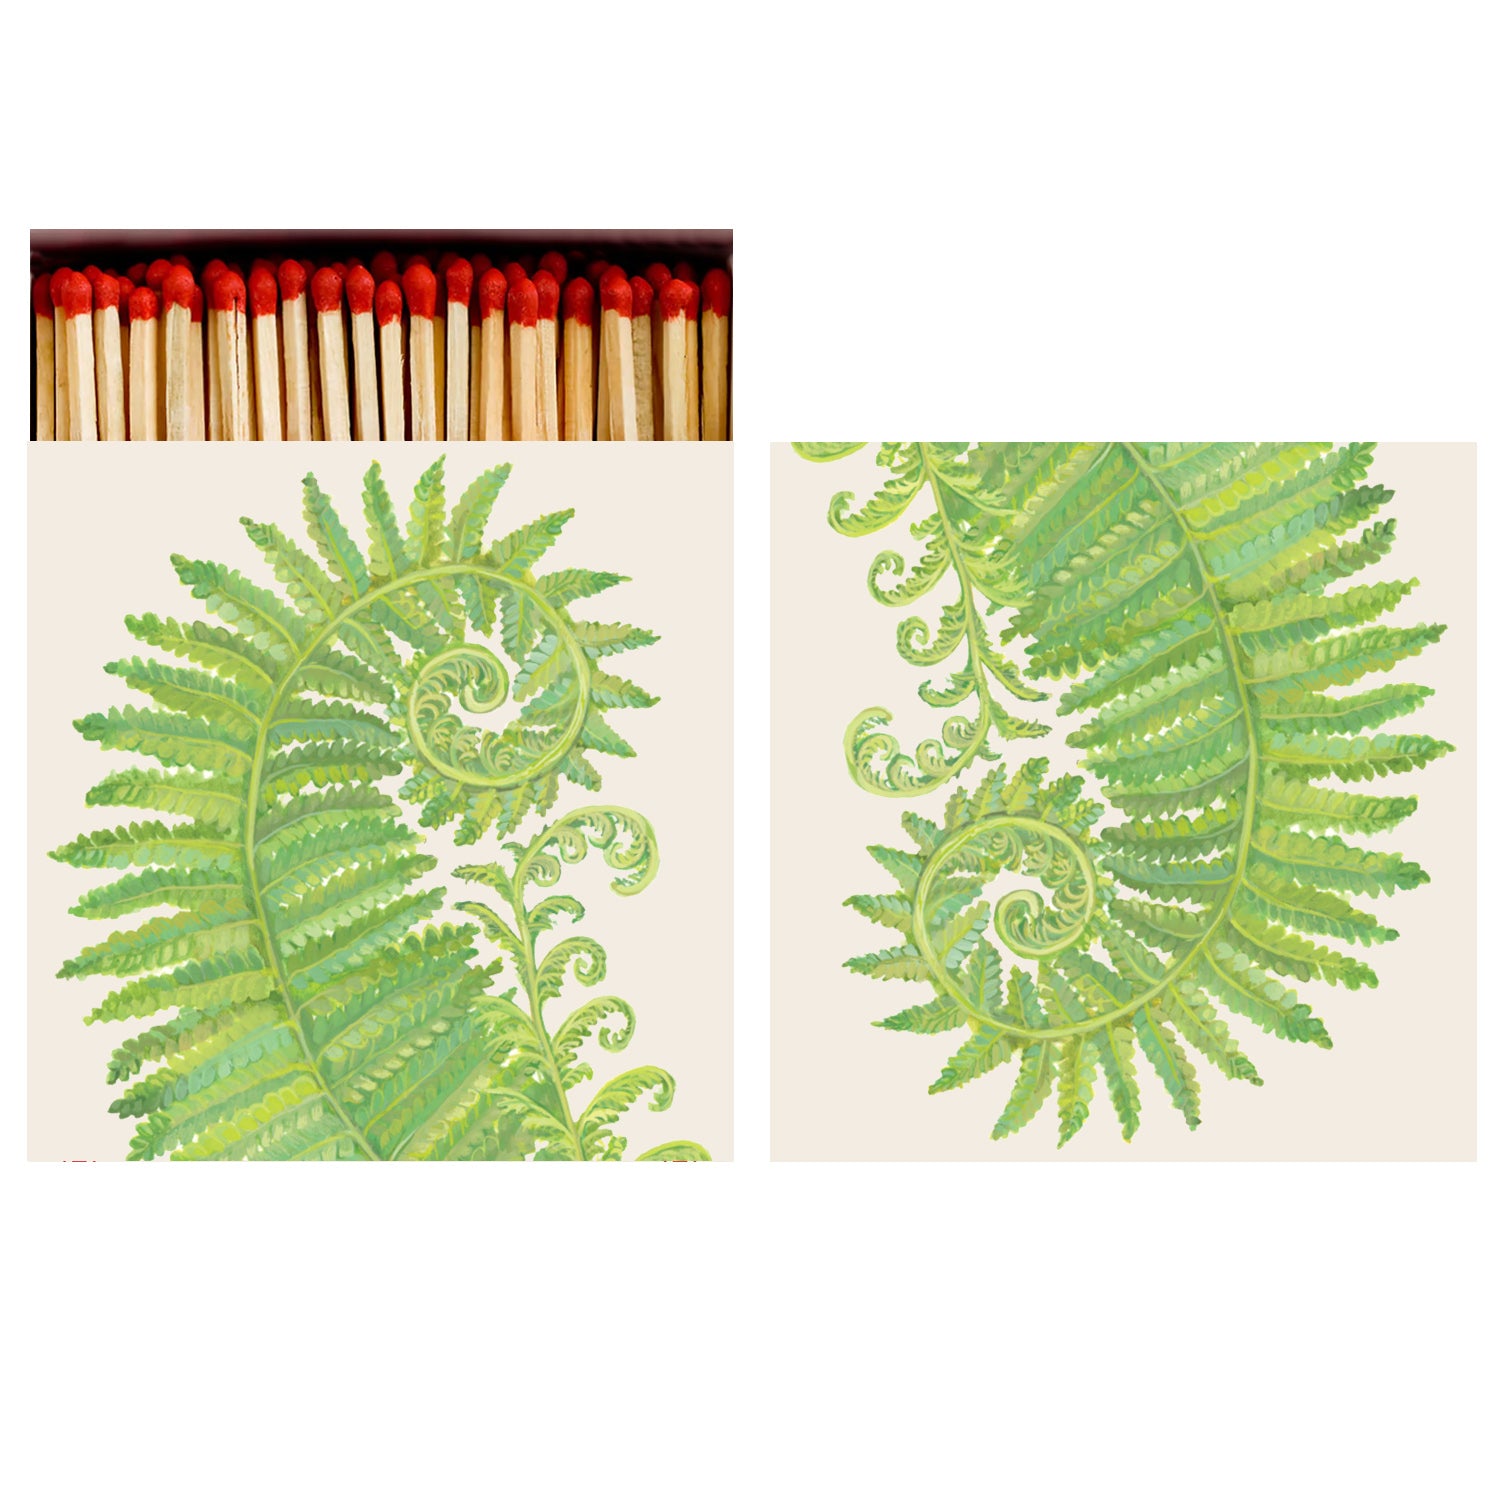 Two identical sides of a square match box, the left of which is open slightly to reveal the matches inside. The artwork on the box depicts a vibrant bright green fern frond that spirals delicately over a cream background.